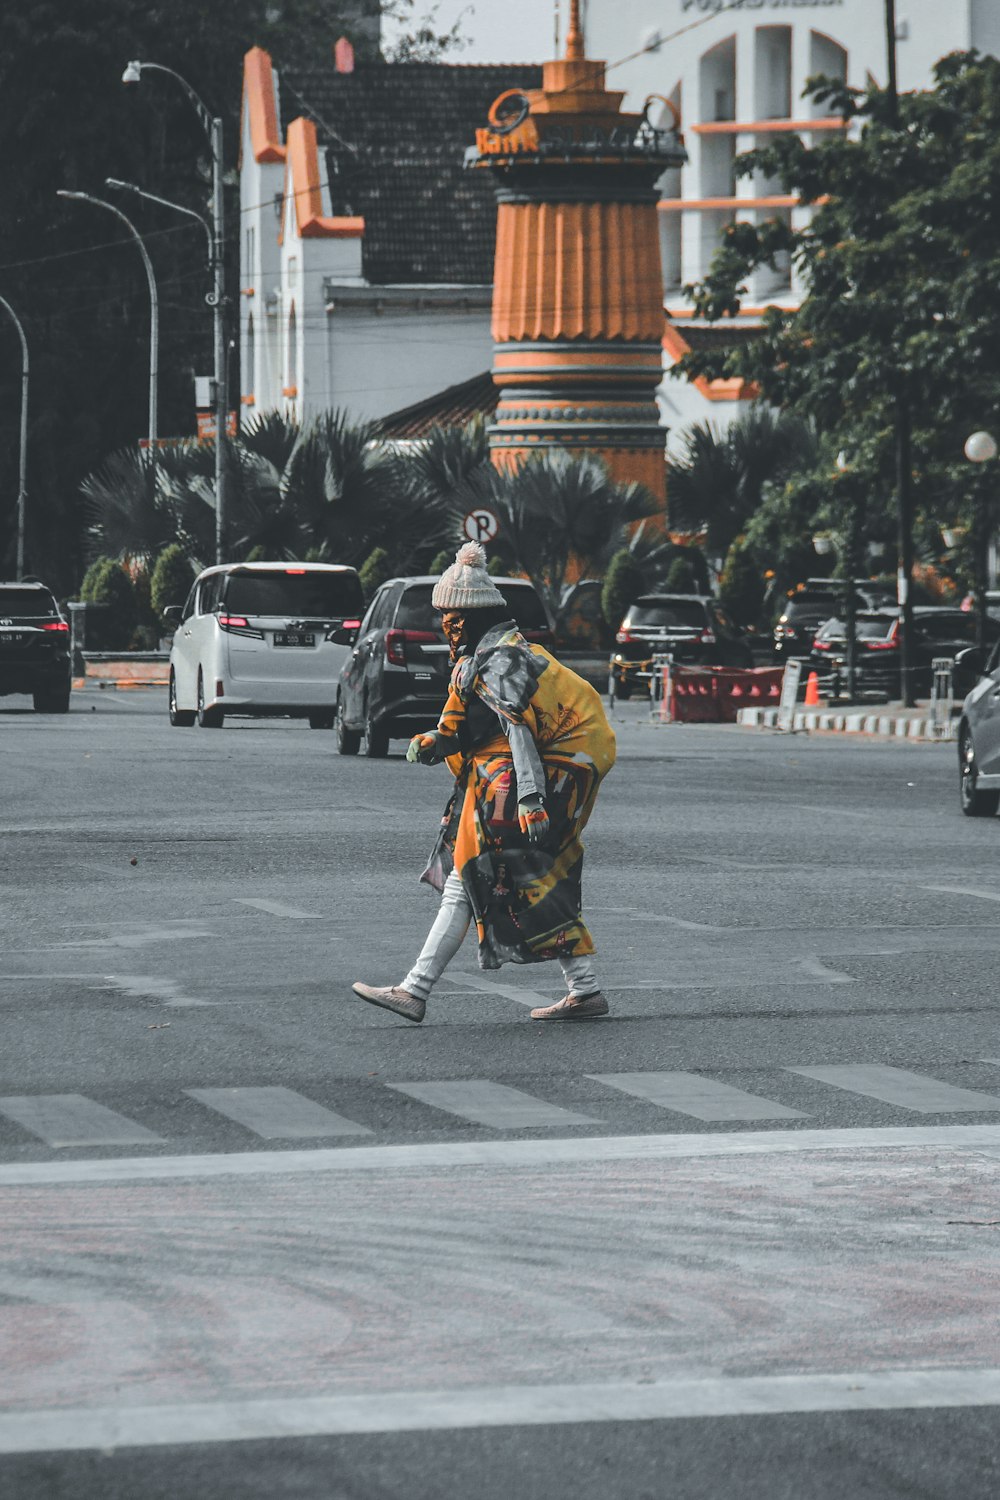 a person crossing a street in a city